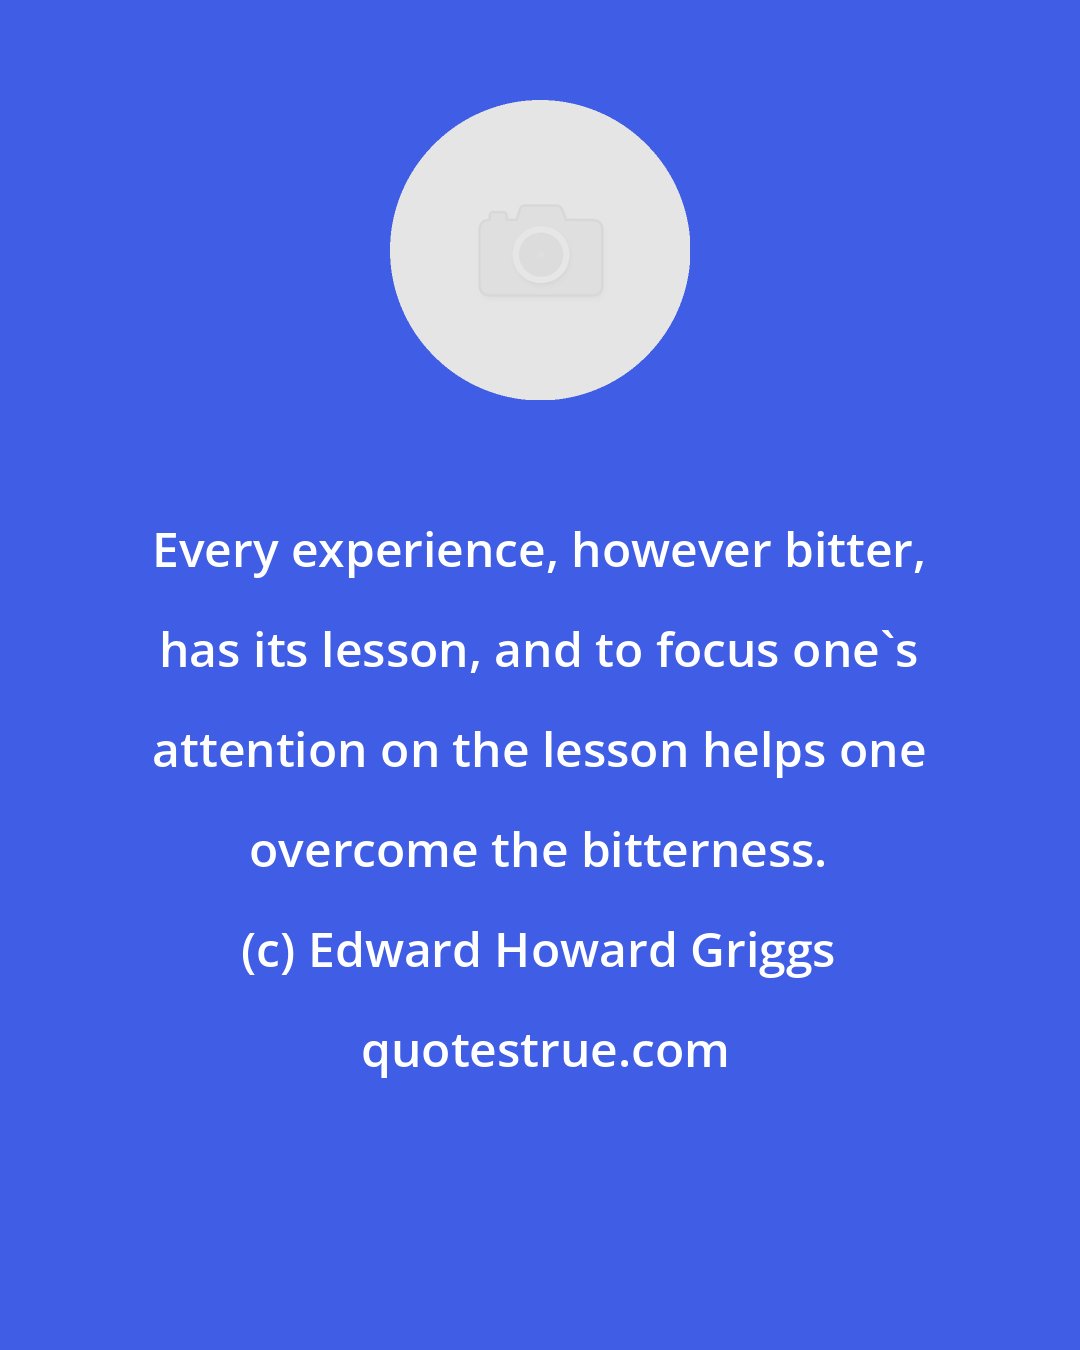 Edward Howard Griggs: Every experience, however bitter, has its lesson, and to focus one's attention on the lesson helps one overcome the bitterness.